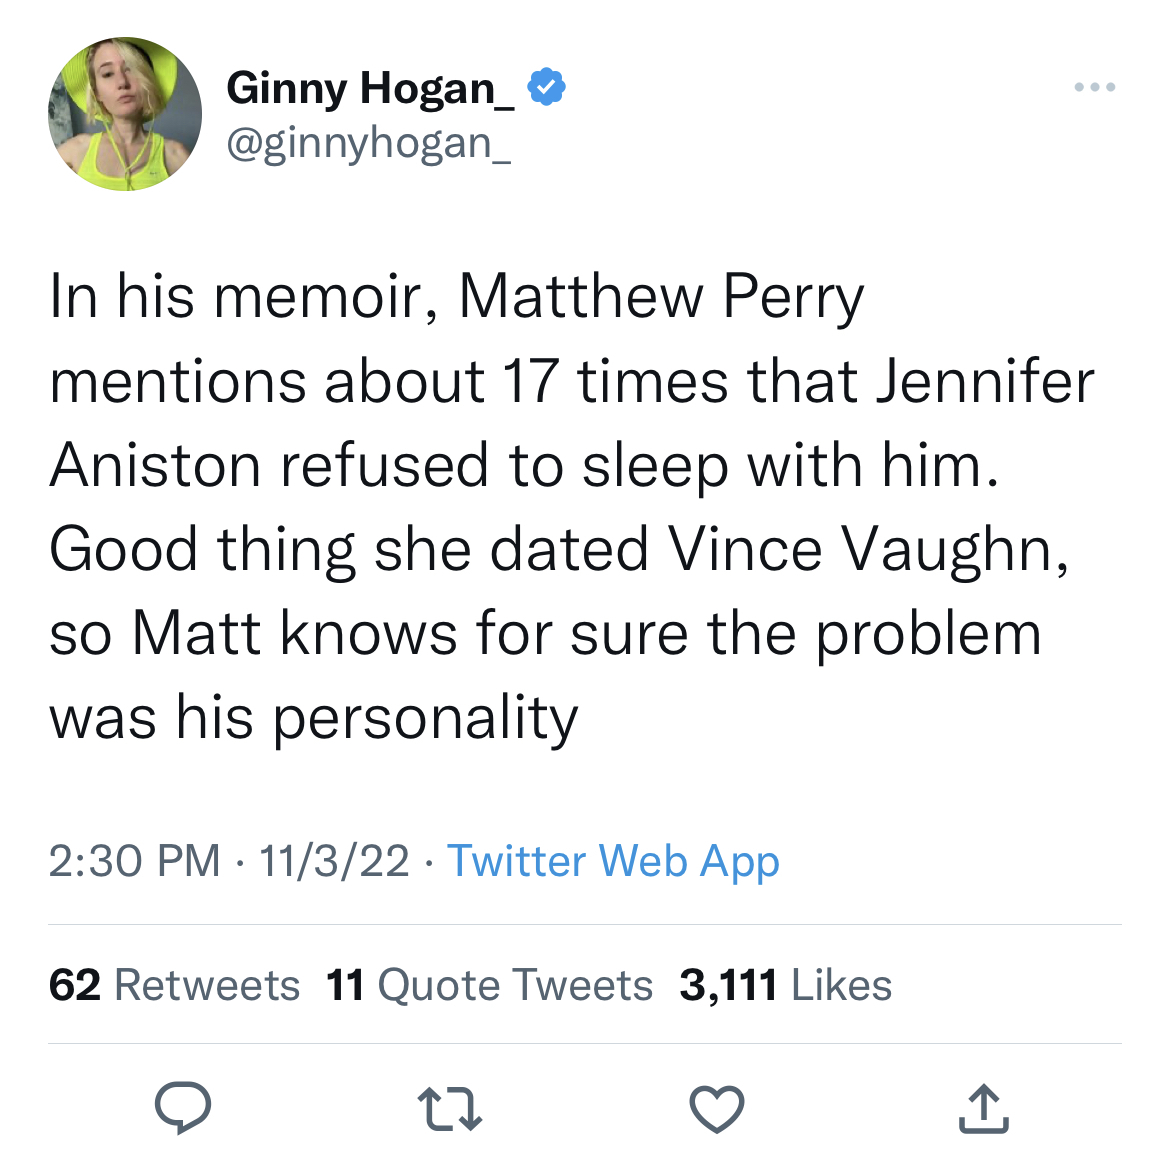 tweets roasting celebs - Ginny Hogan_ In his memoir, Matthew Perry mentions about 17 times that Jennifer Aniston refused to sleep with him. Good thing she dated Vince Vaughn, so Matt knows for sure the problem was his personality 11322. Twitter Web App 62